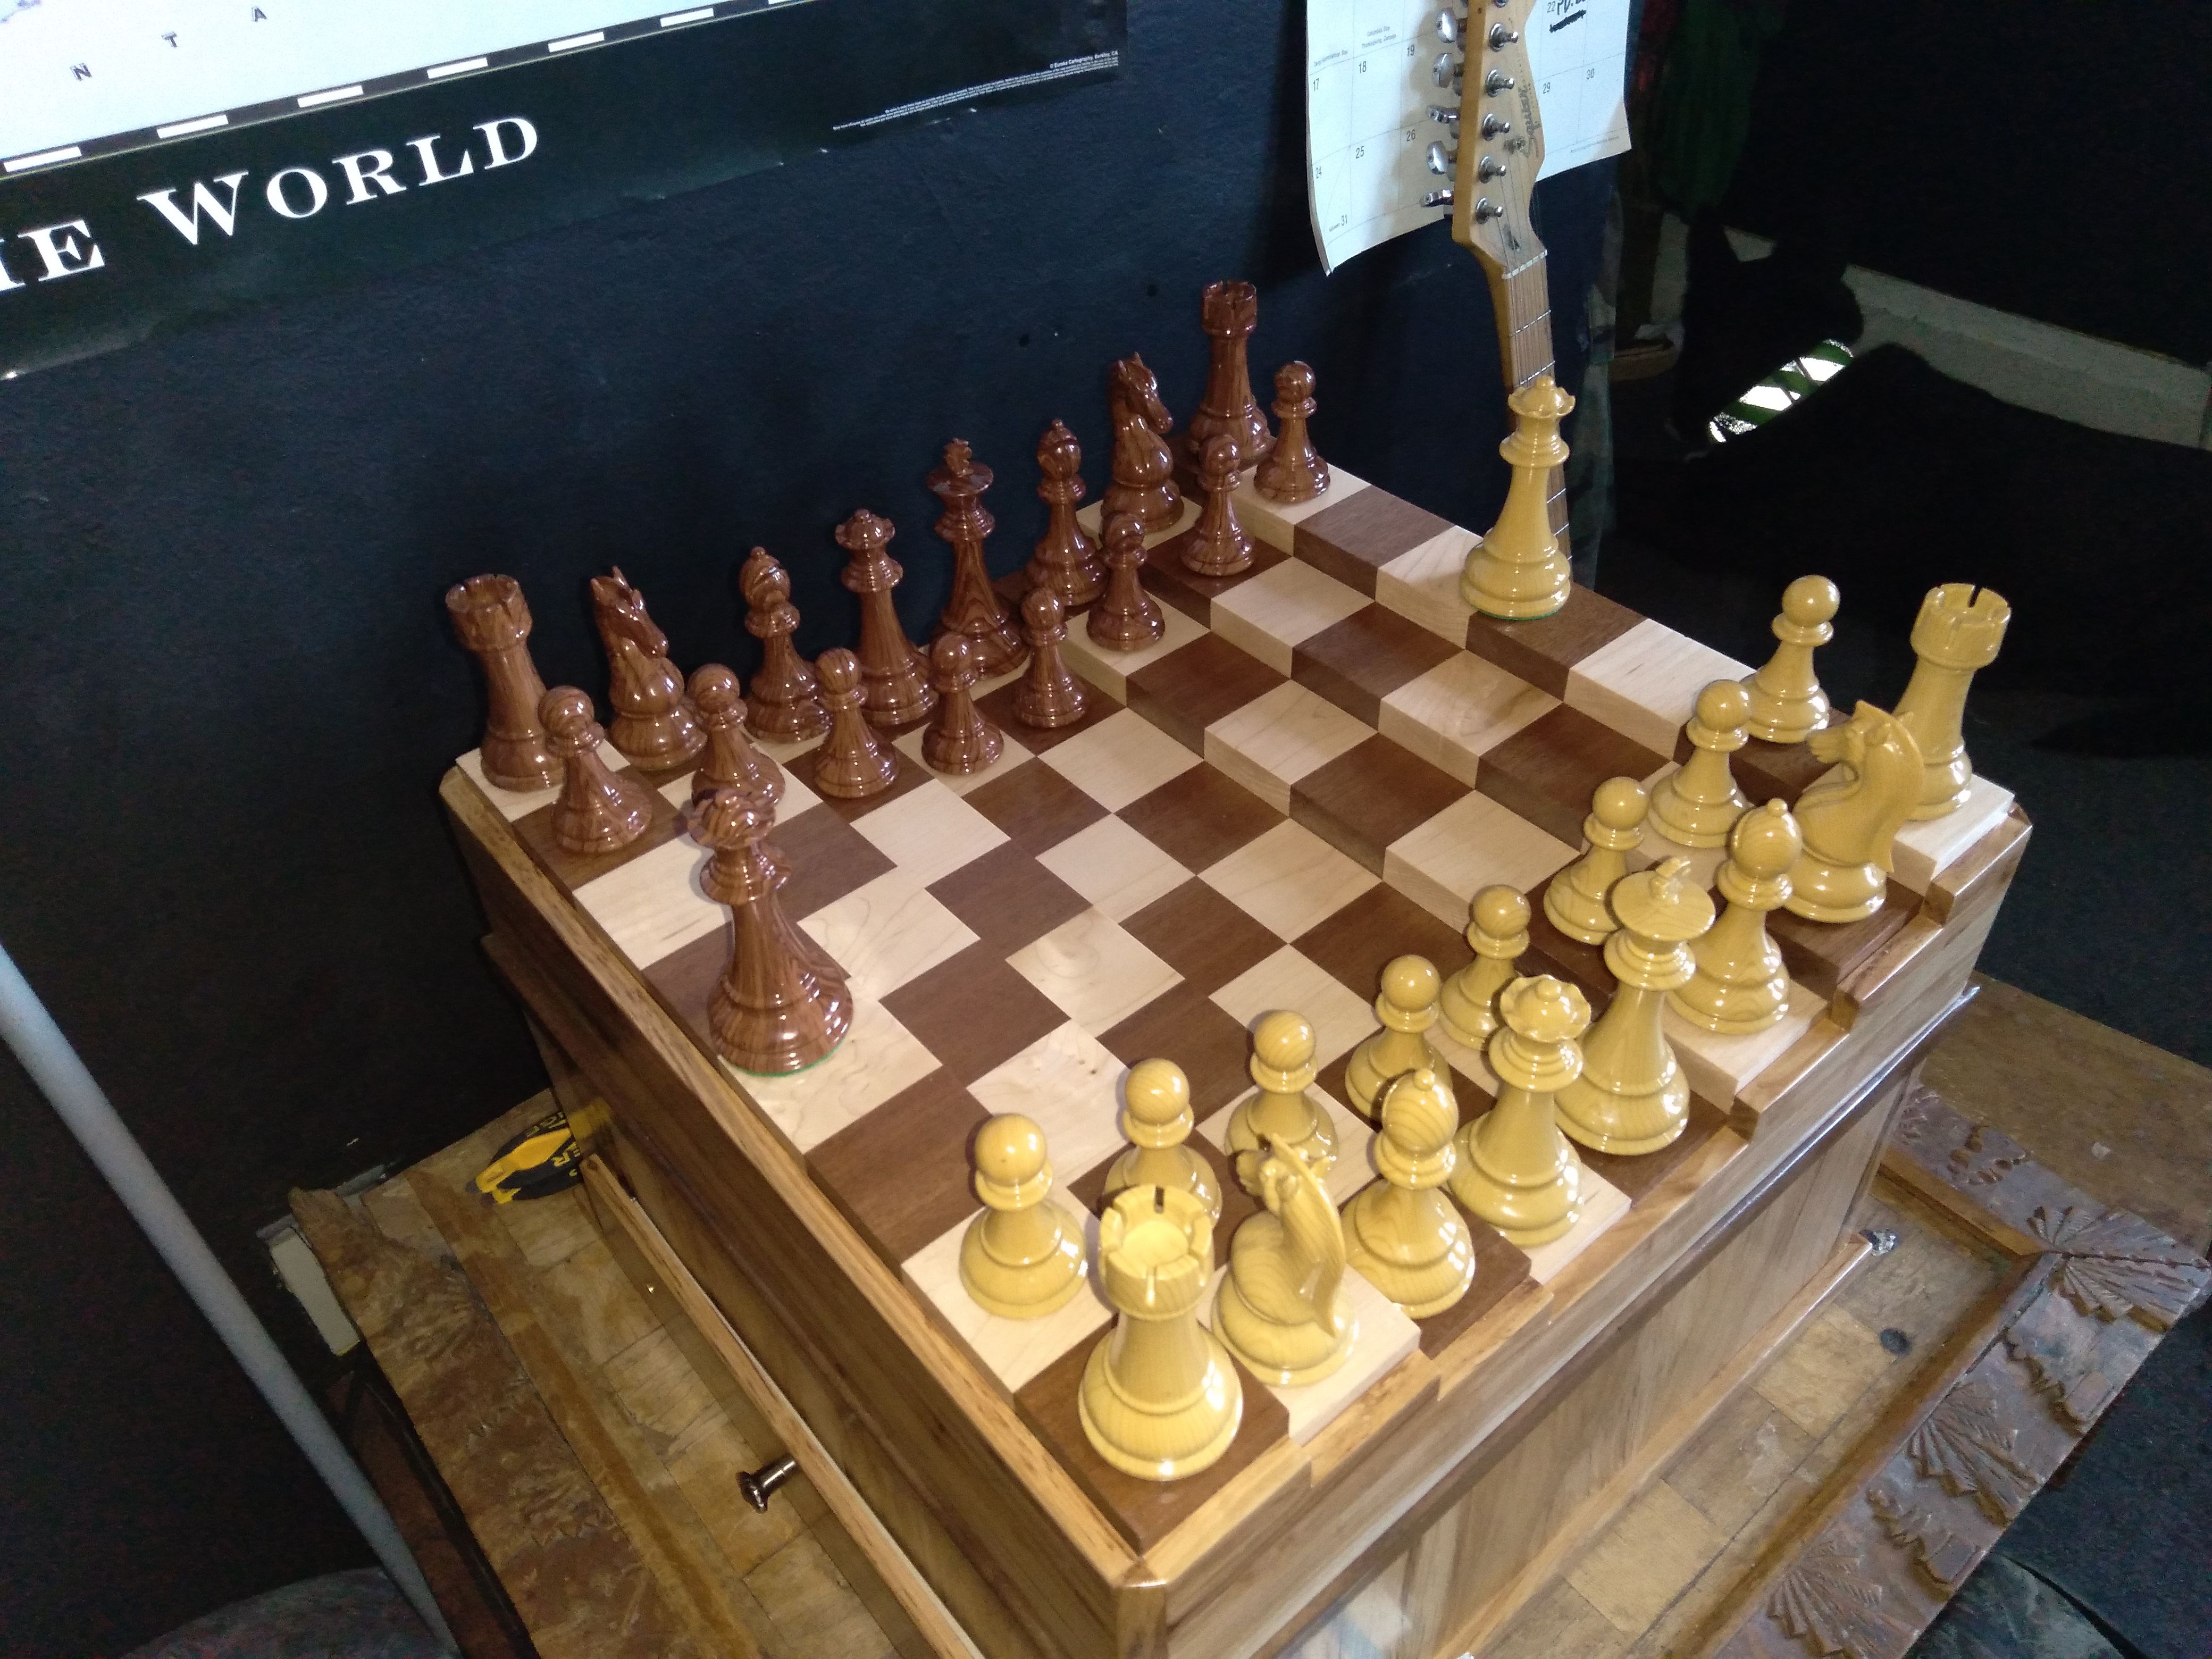 chess board for analysis/book work - Chess Forums 